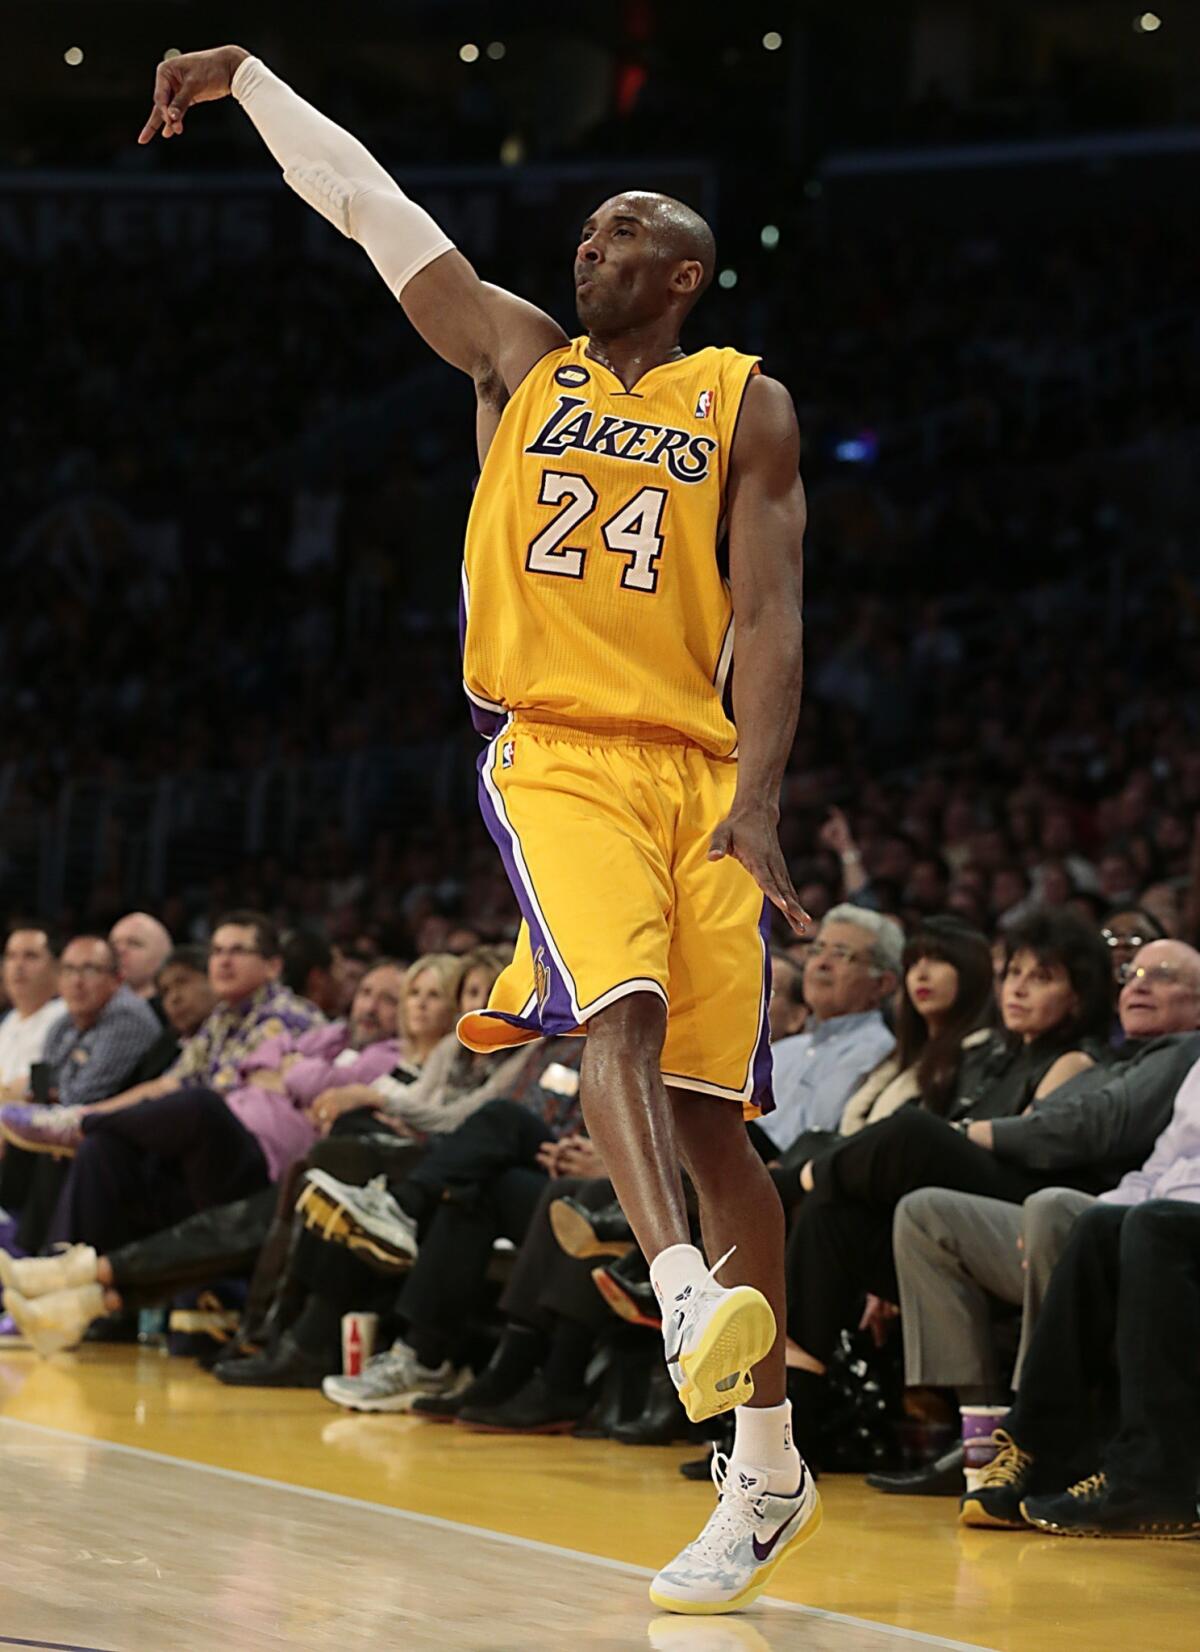 Kobe Bryant follows through as he hits a three-pointer late in the game against the New Orleans Hornets.